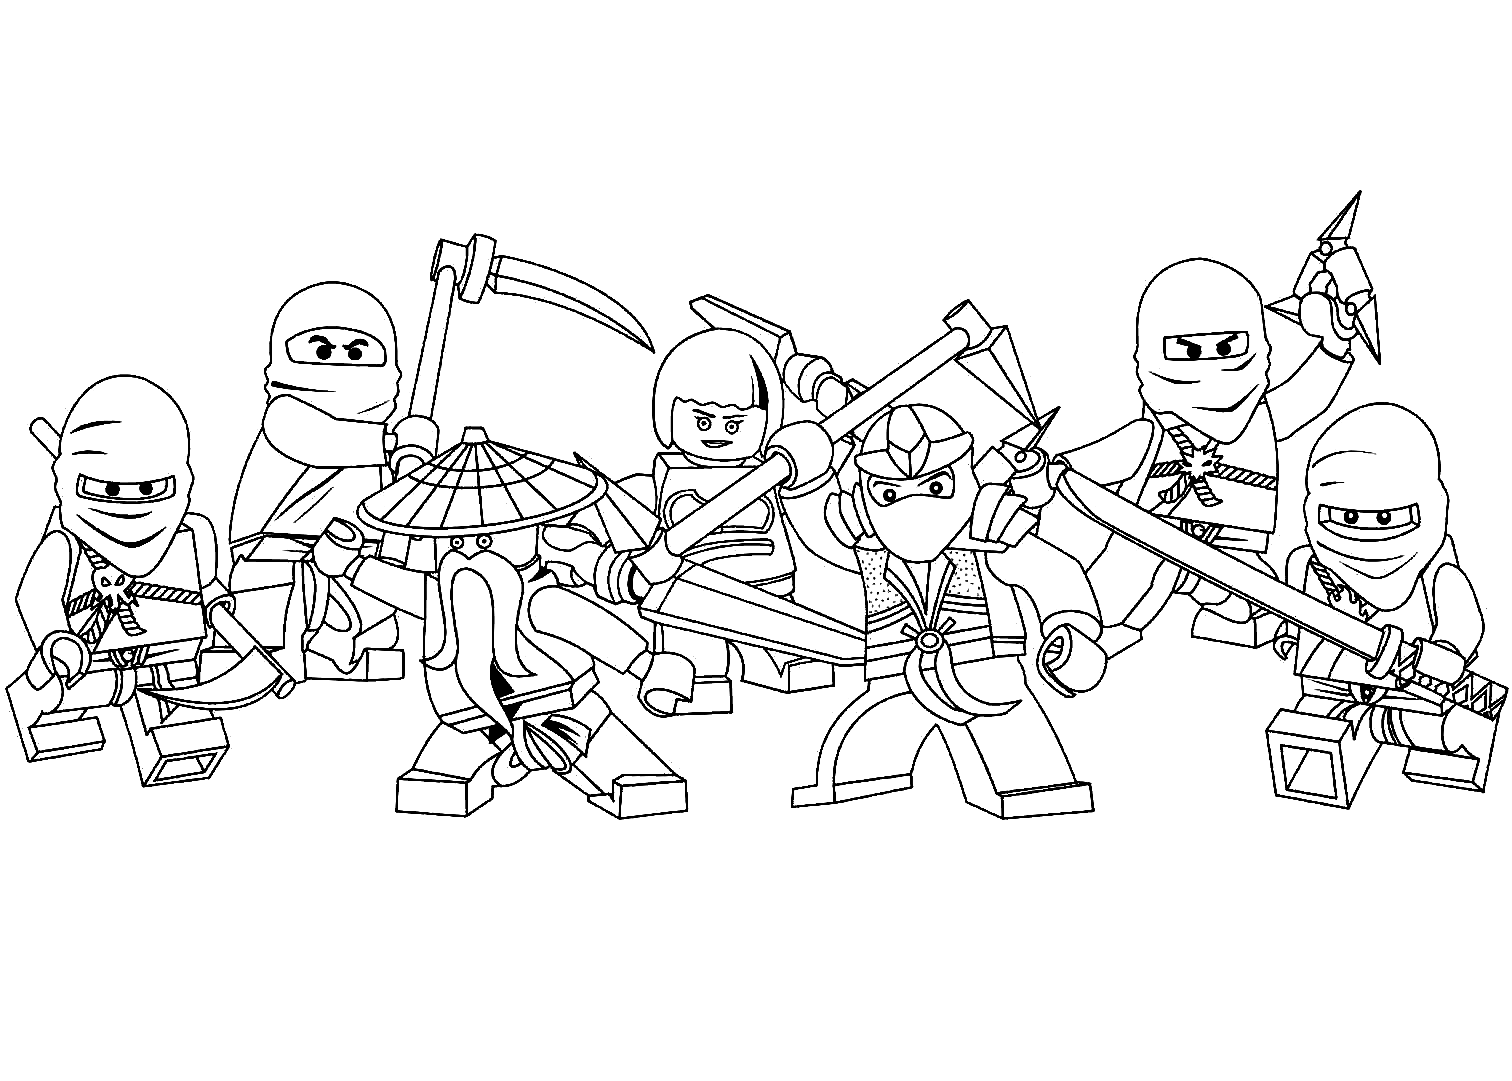 Team of Master Wu from Lego Ninjago Coloring Page